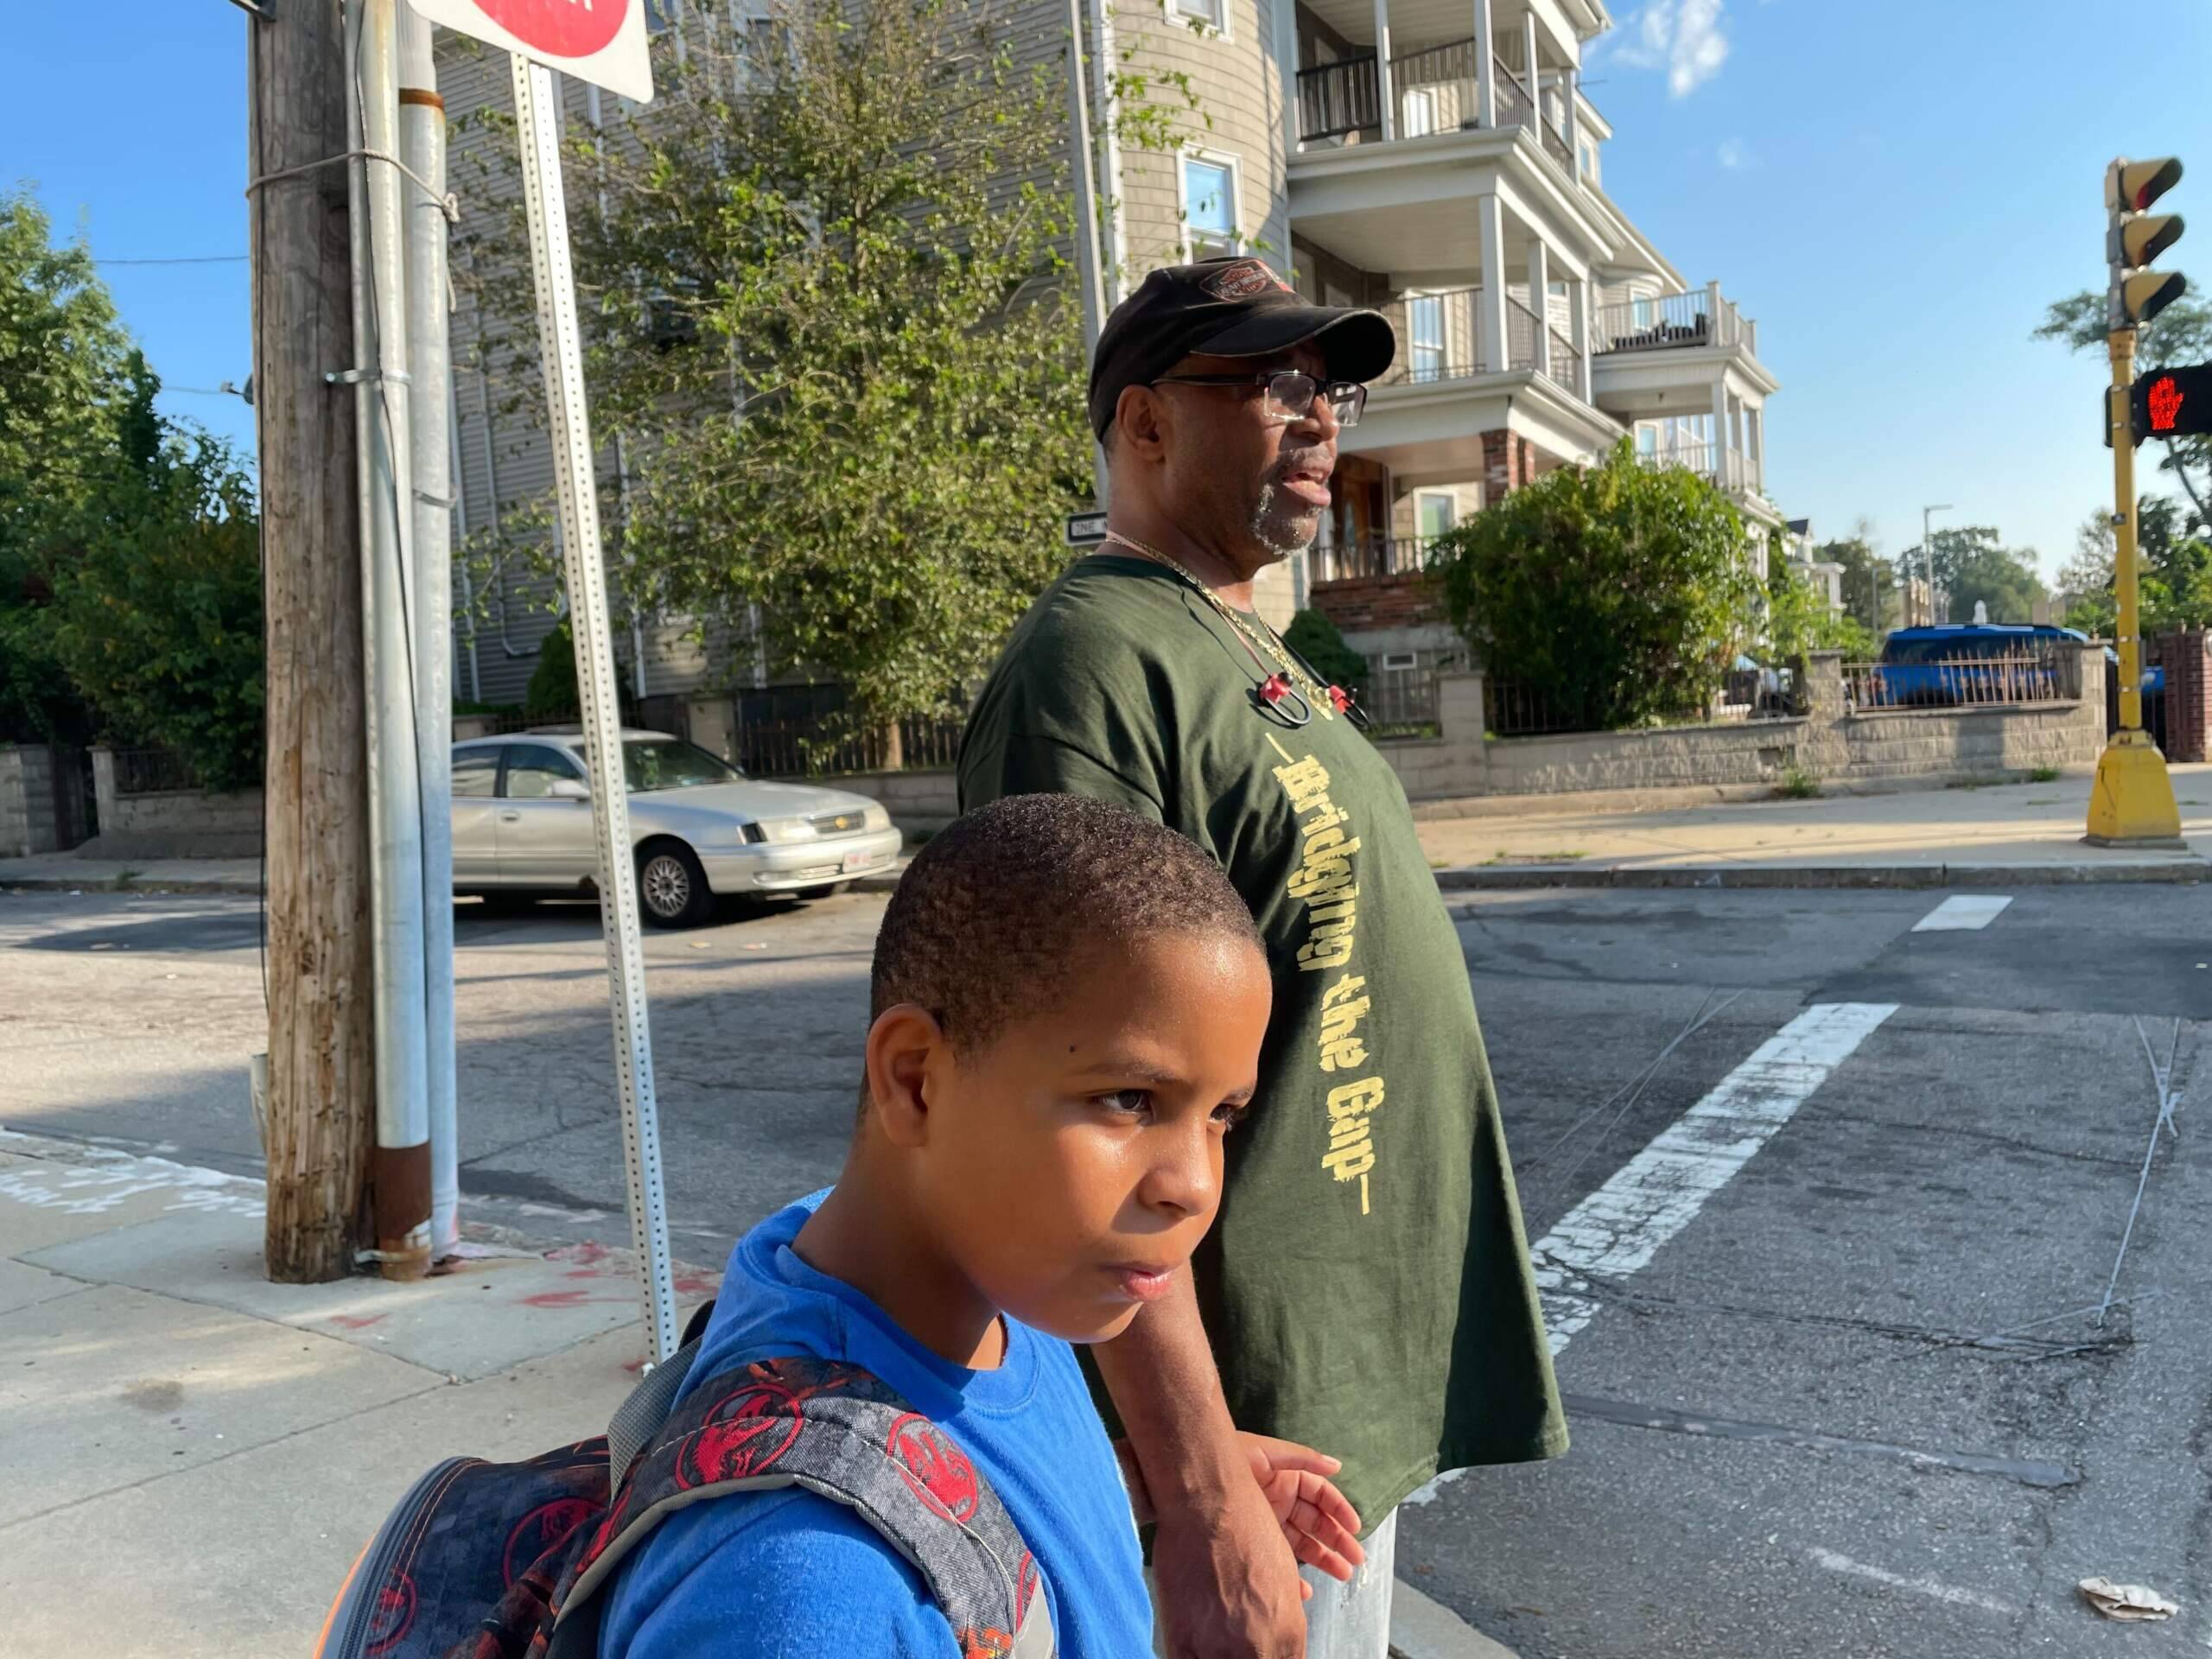 Fitzgerald Allen and his grandson, Harley, wait for a school bus that's running late in Mattapan on the first day of school. (Max Larkin/WBUR)